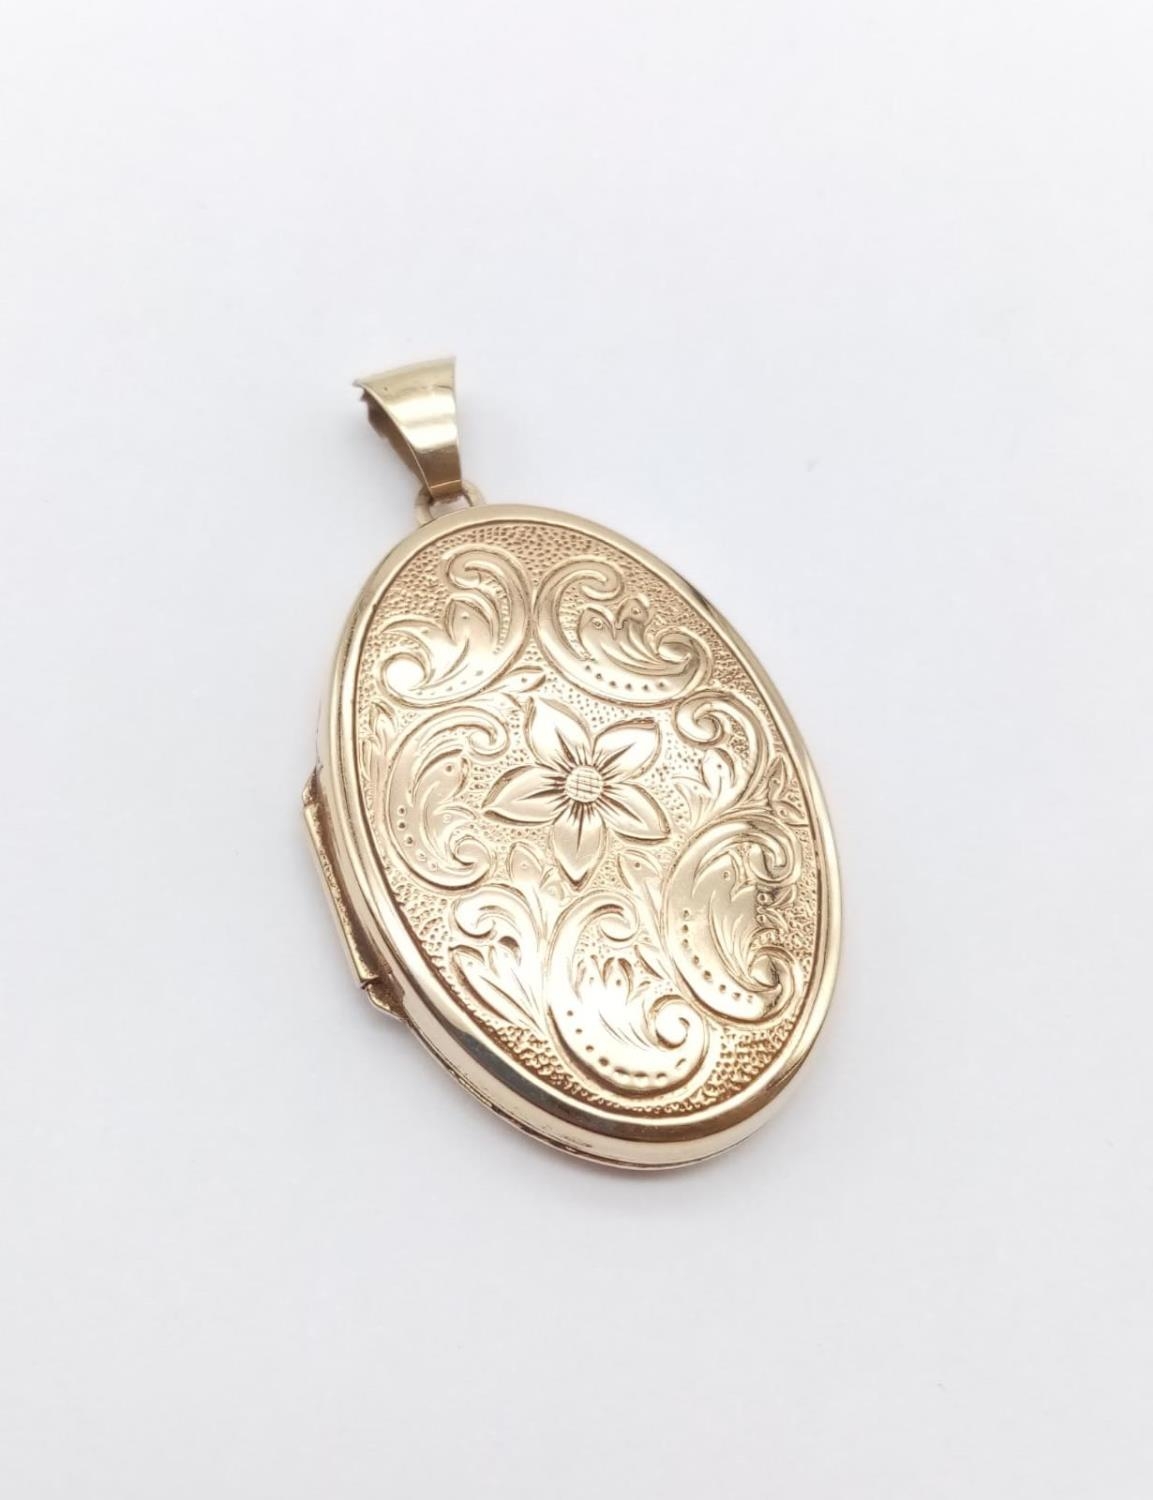 9CT GOLD OVAL PATTERNED LOCKET, WEIGHT 4.5G